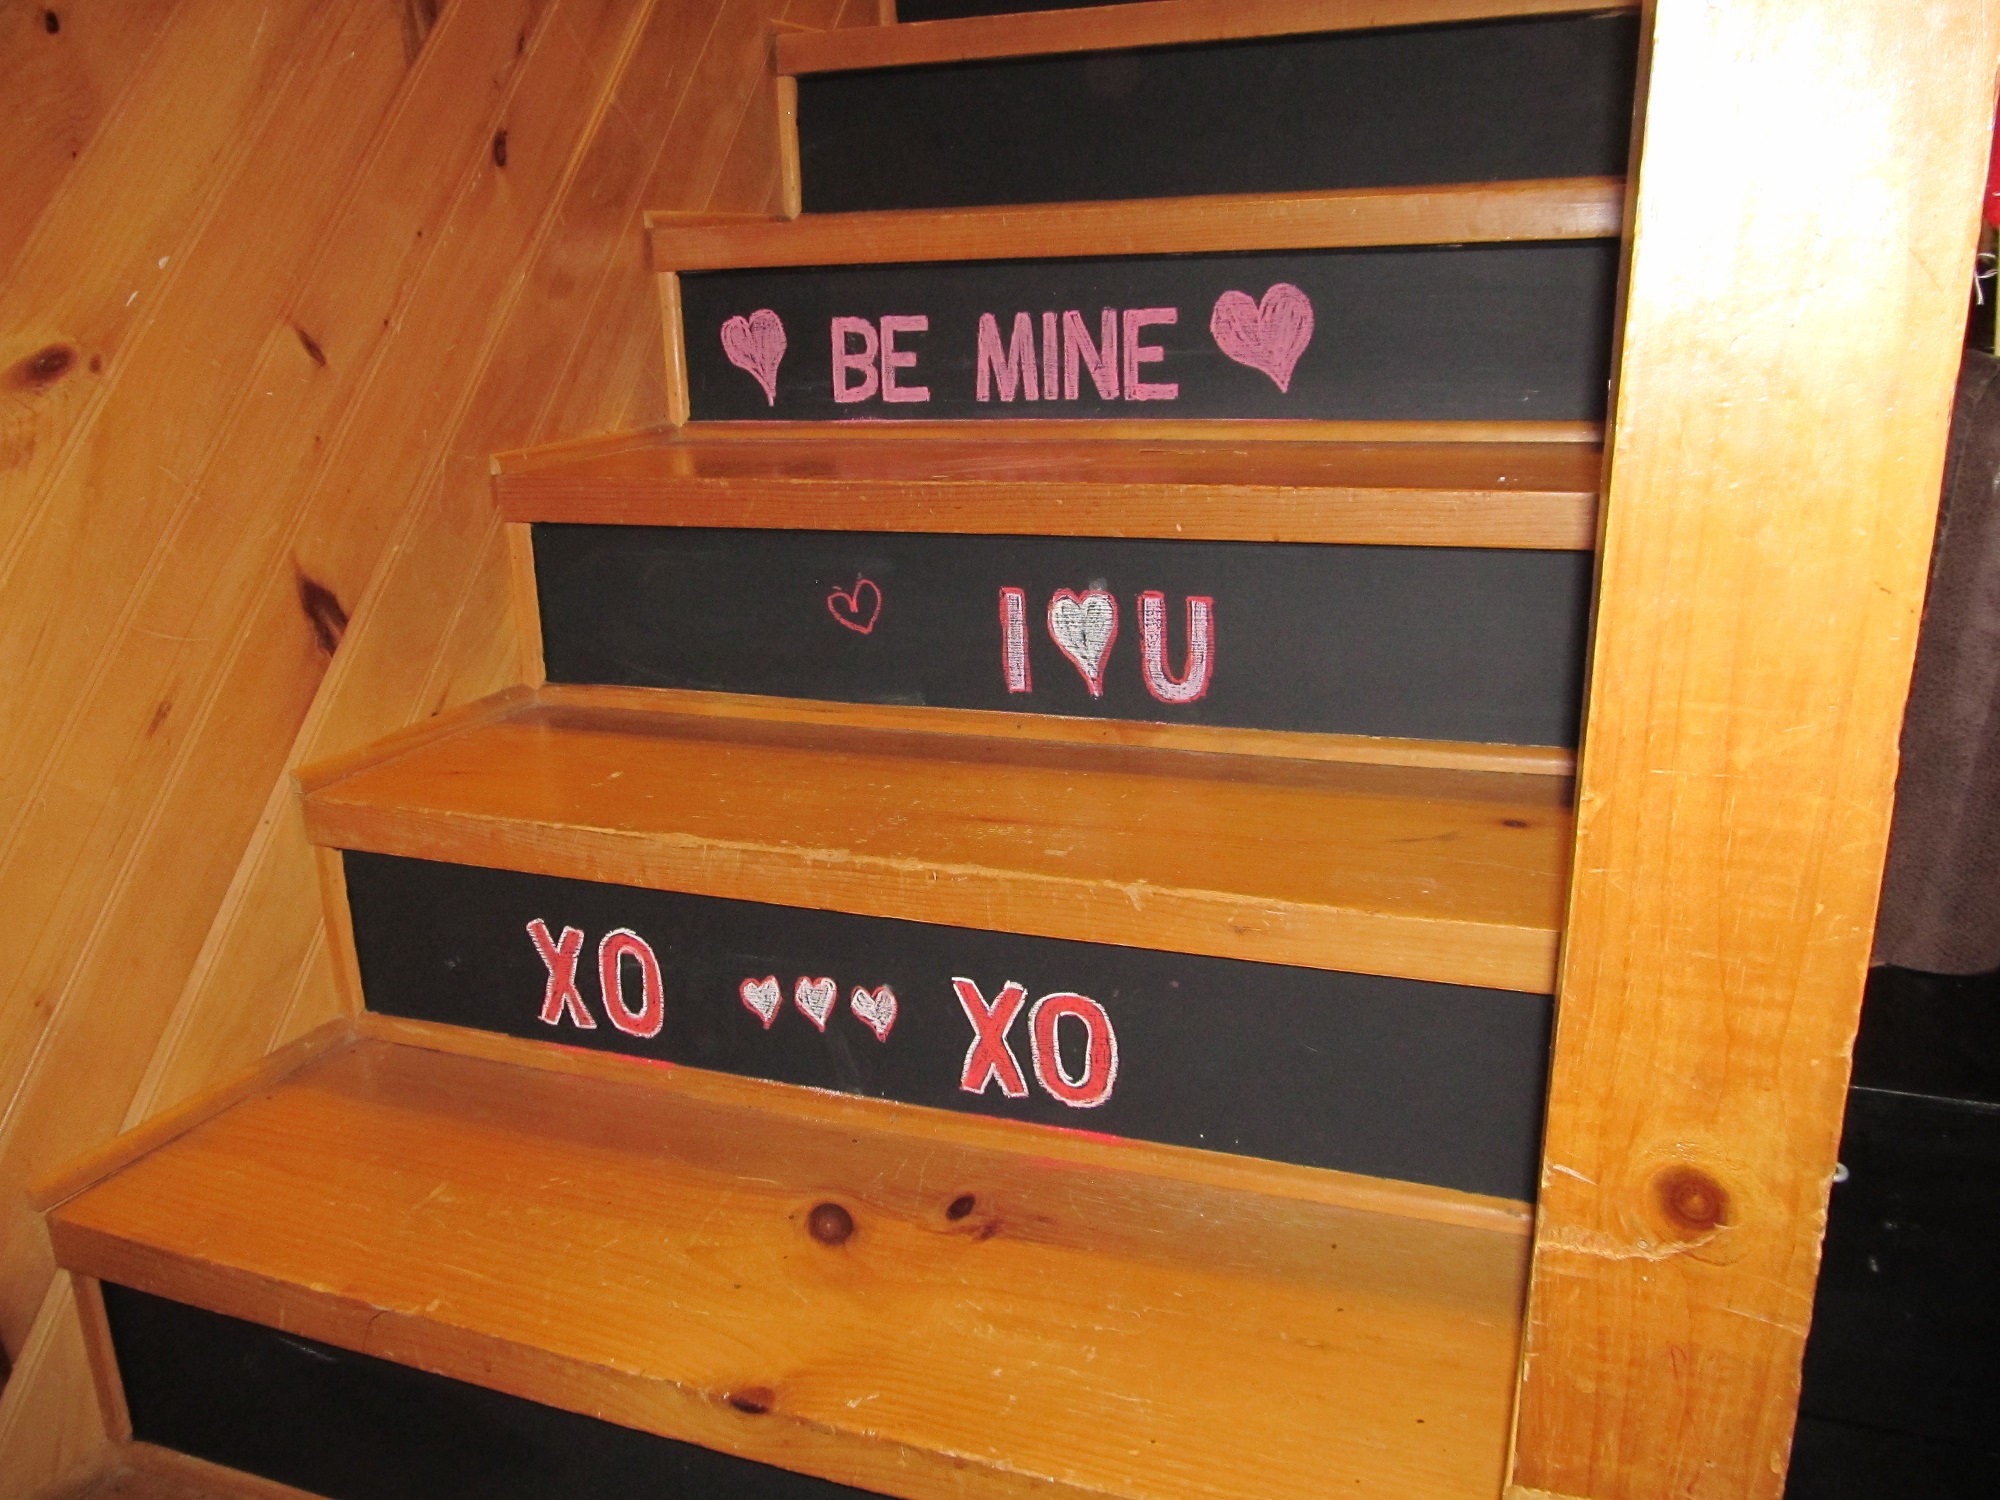 <!-- AddThis Share Buttons above via filter on get_the_excerpt -->
<div class="at-above-post-cat-page" data-url="http://www.not2crafty.com/2014/01/fun-idea-stairway/" data-title="A fun idea for your stairway"></div>
 
I got bored with the stenciling I had done on my stairs and decided I could permanently solve that problem by using chalkboard paint. This will enable me to [...]<!-- AddThis Share Buttons below via filter on get_the_excerpt -->
<div class="at-below-post-cat-page" data-url="http://www.not2crafty.com/2014/01/fun-idea-stairway/" data-title="A fun idea for your stairway"></div><!-- AddThis Share Buttons generic via filter on get_the_excerpt -->
<!-- AddThis Related Posts generic via filter on get_the_excerpt -->
